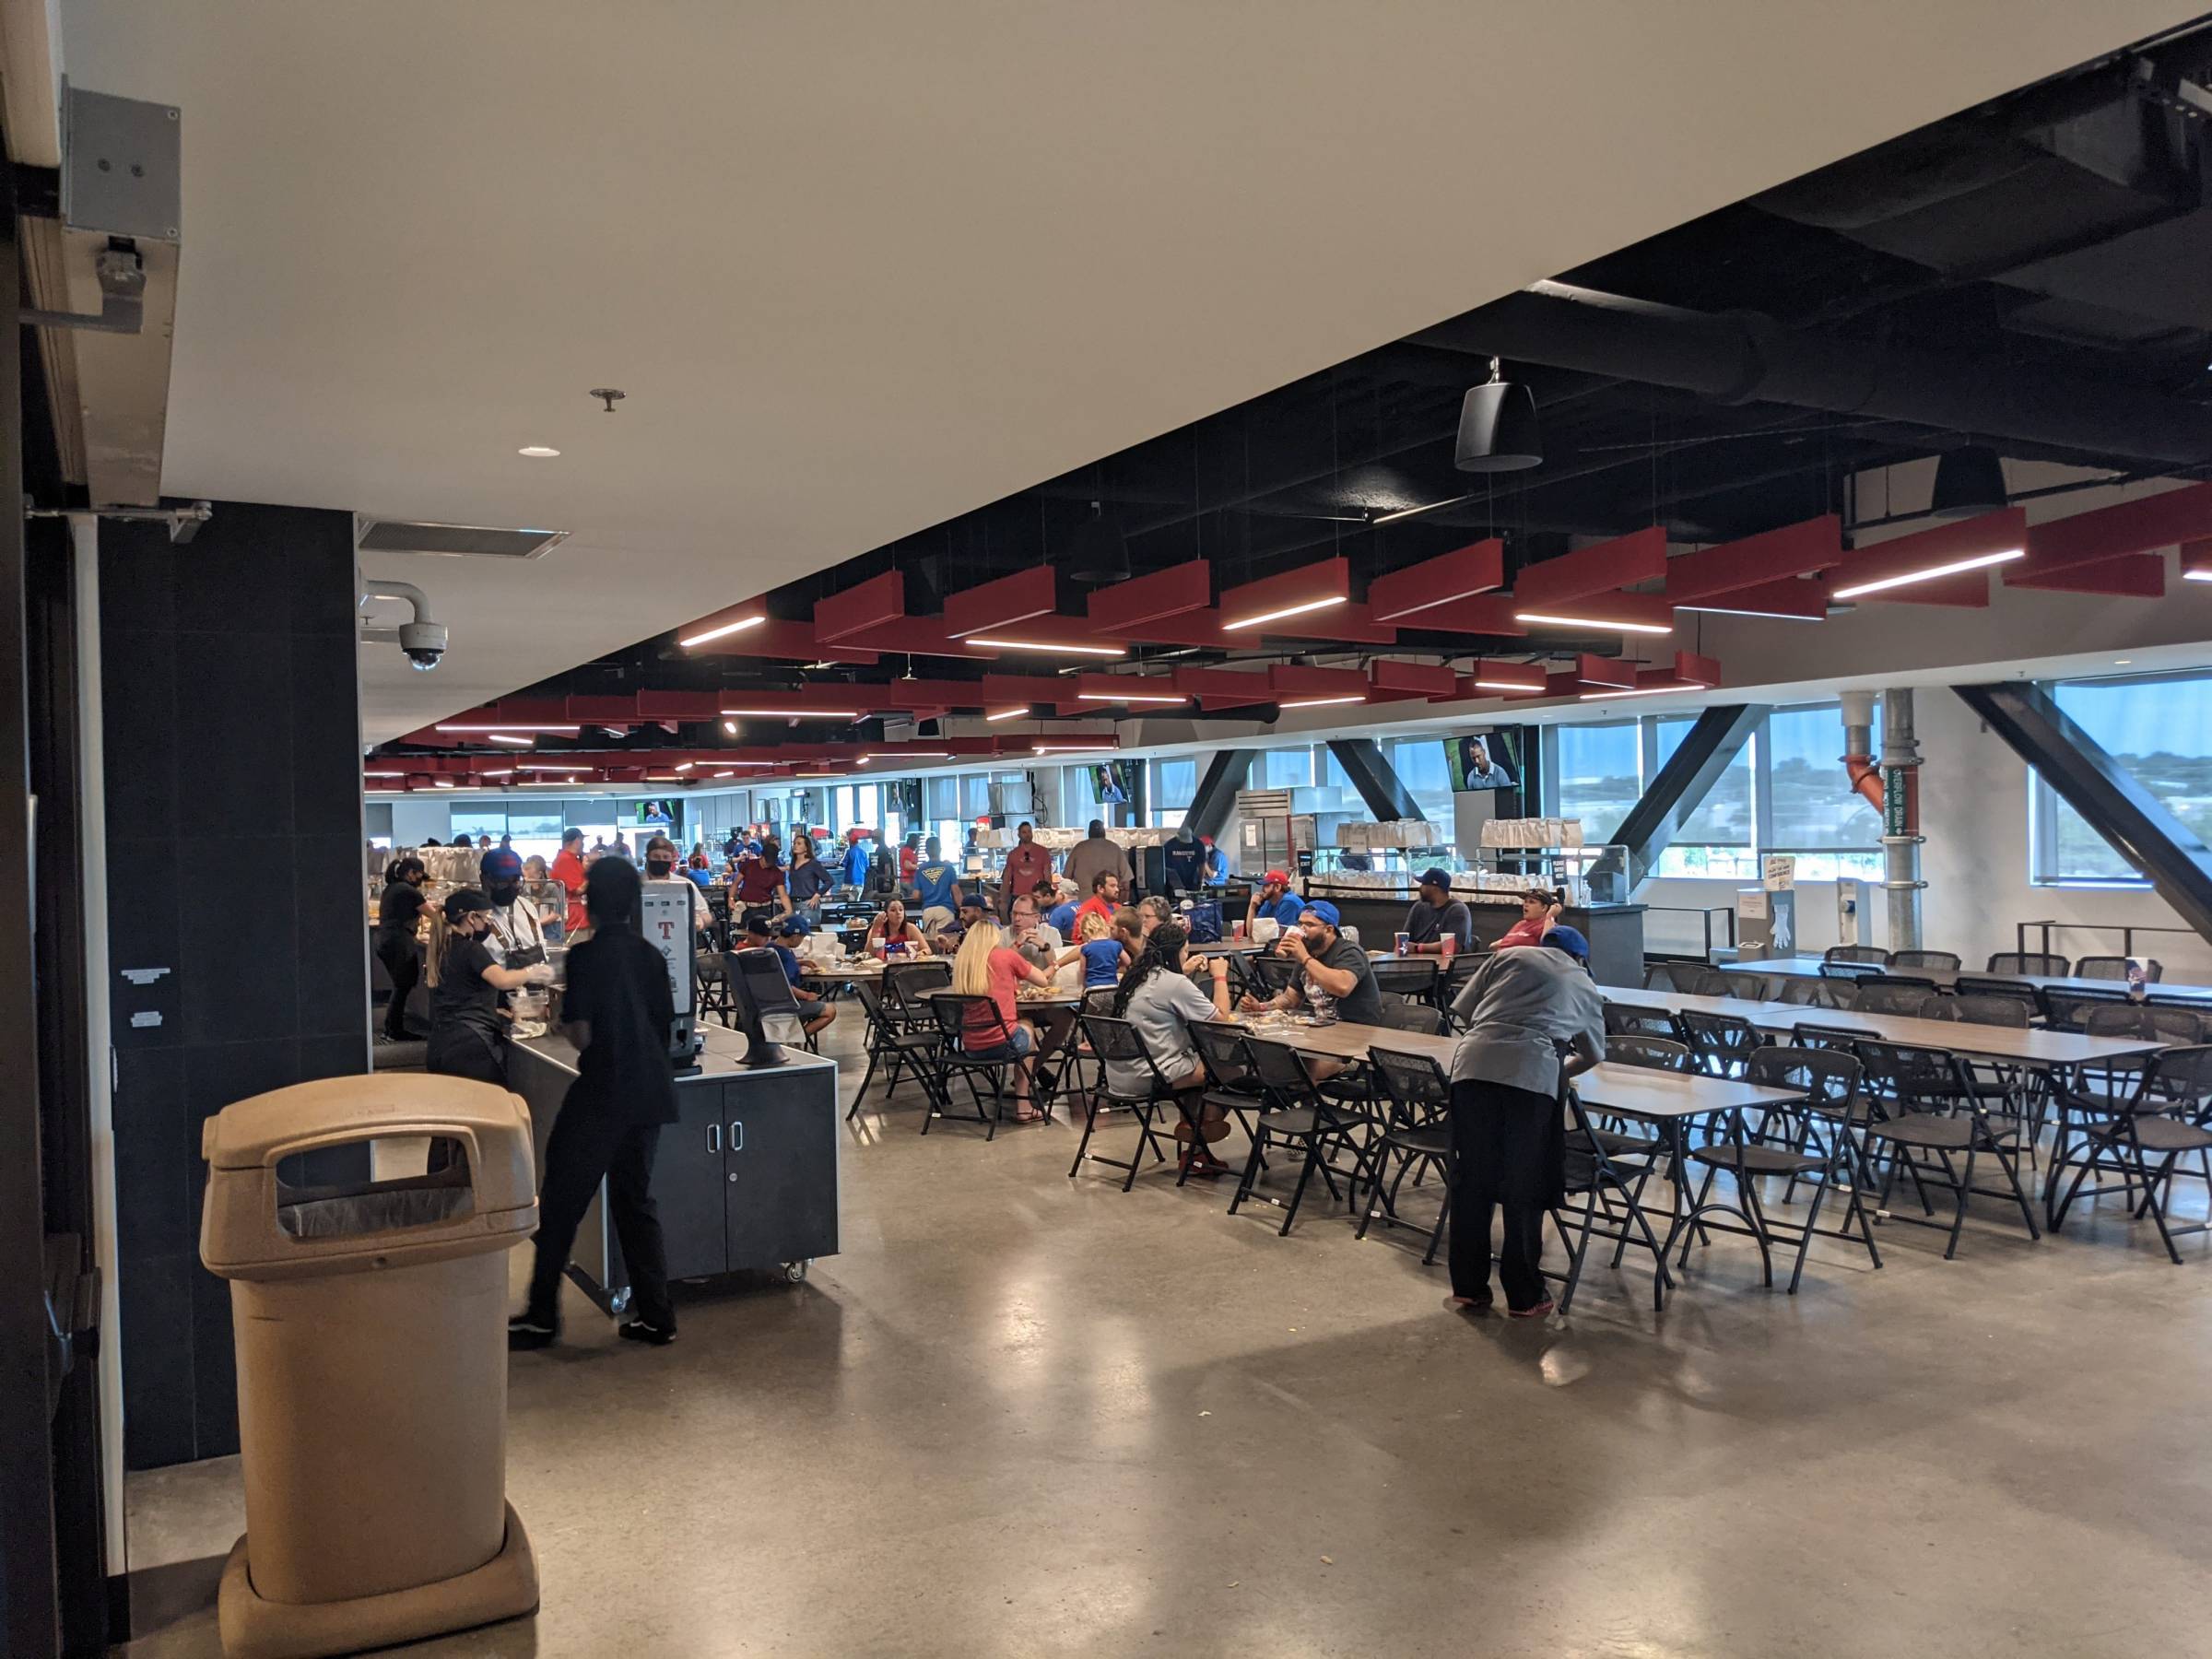 All you can eat lounge at Globe Life Field